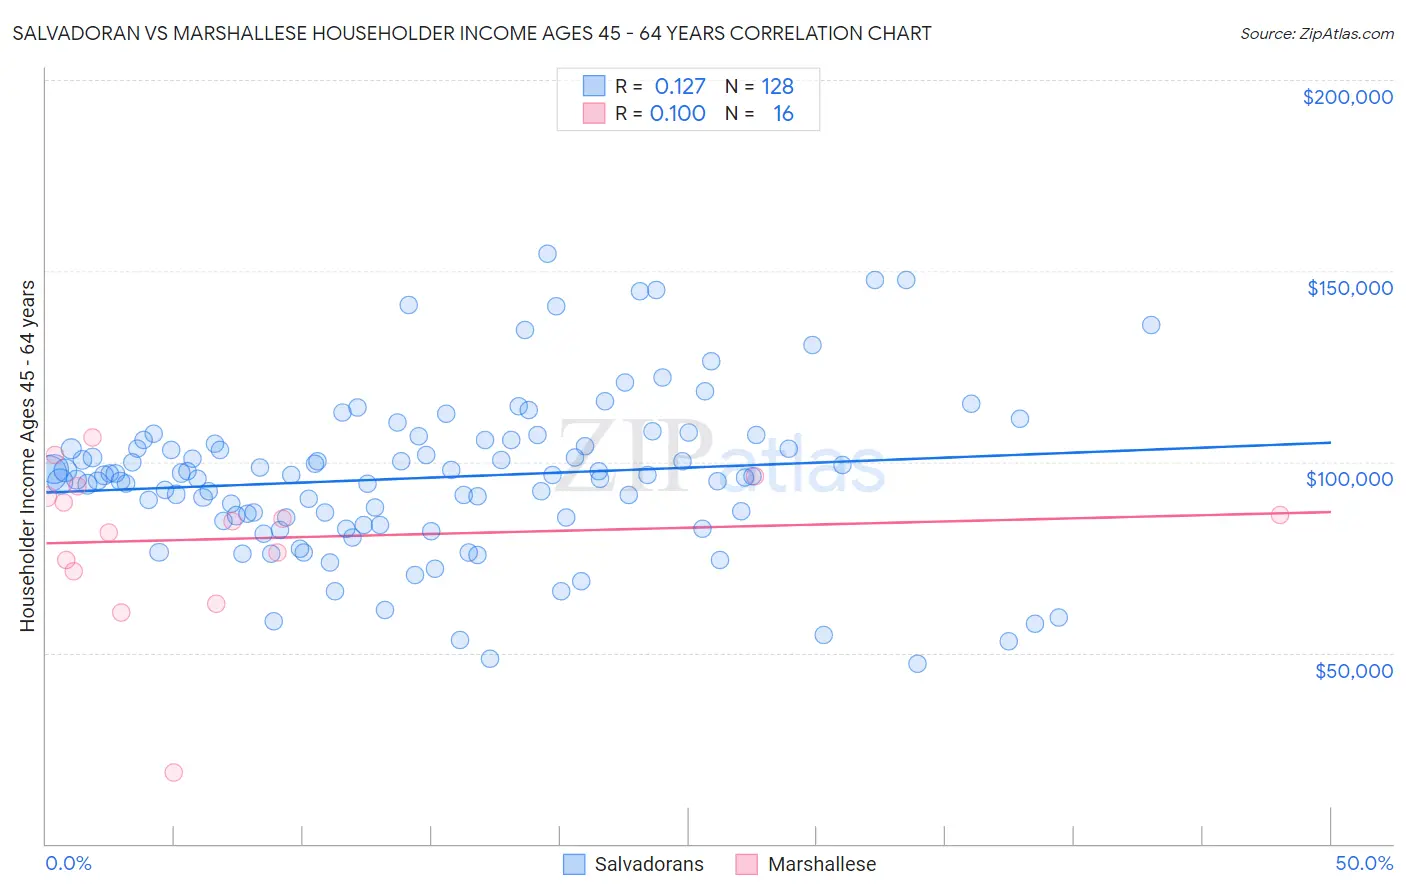 Salvadoran vs Marshallese Householder Income Ages 45 - 64 years